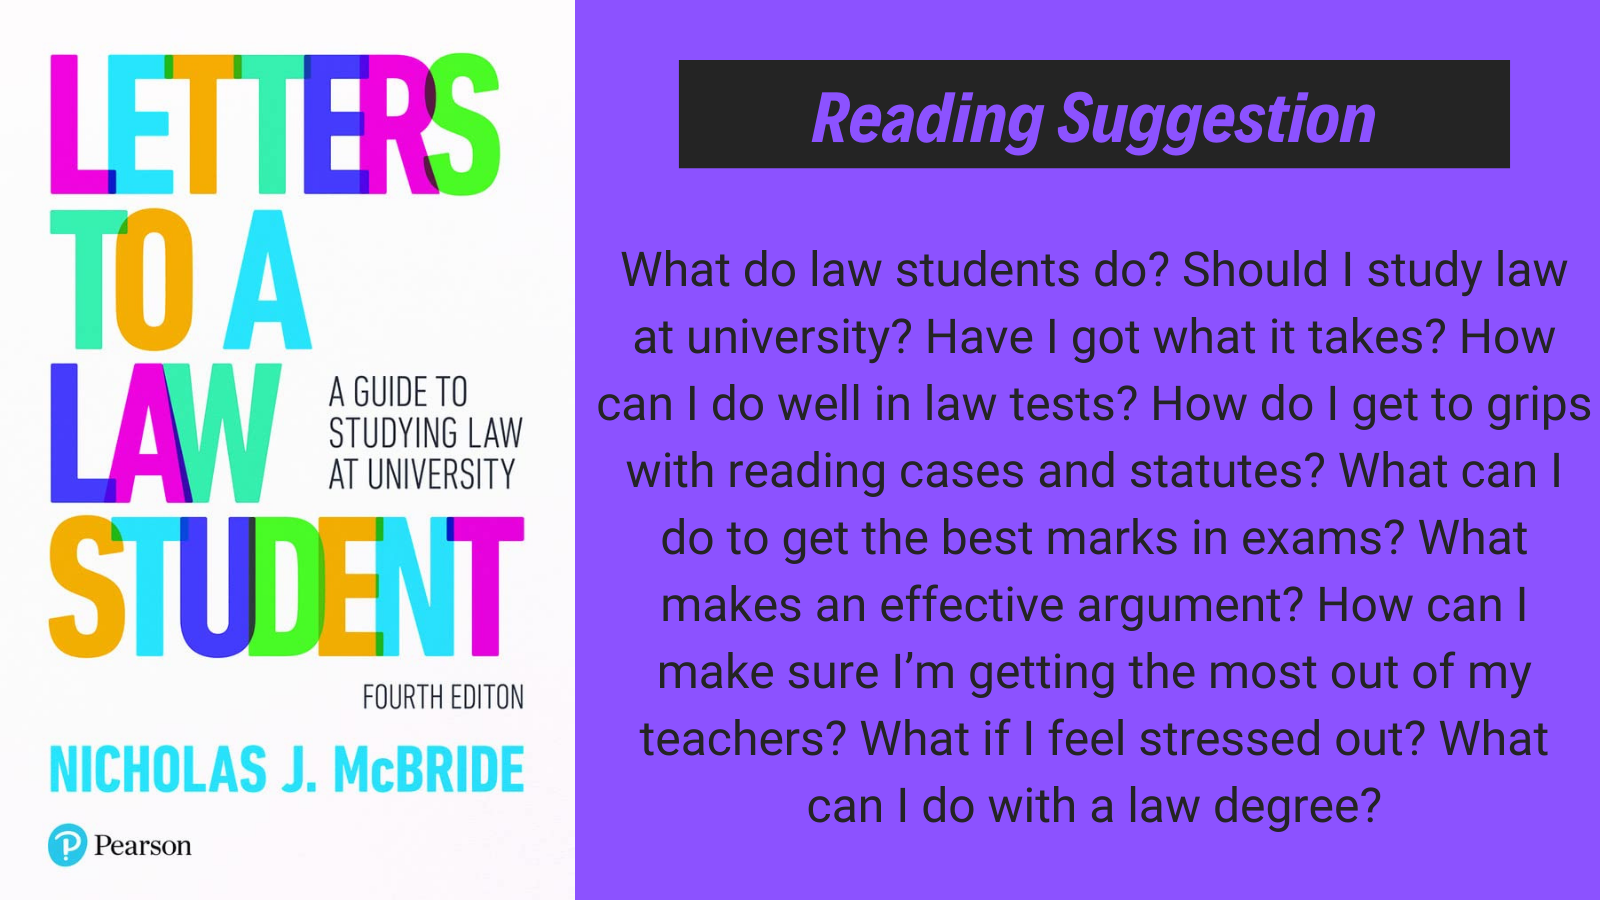 Letters to a Law student